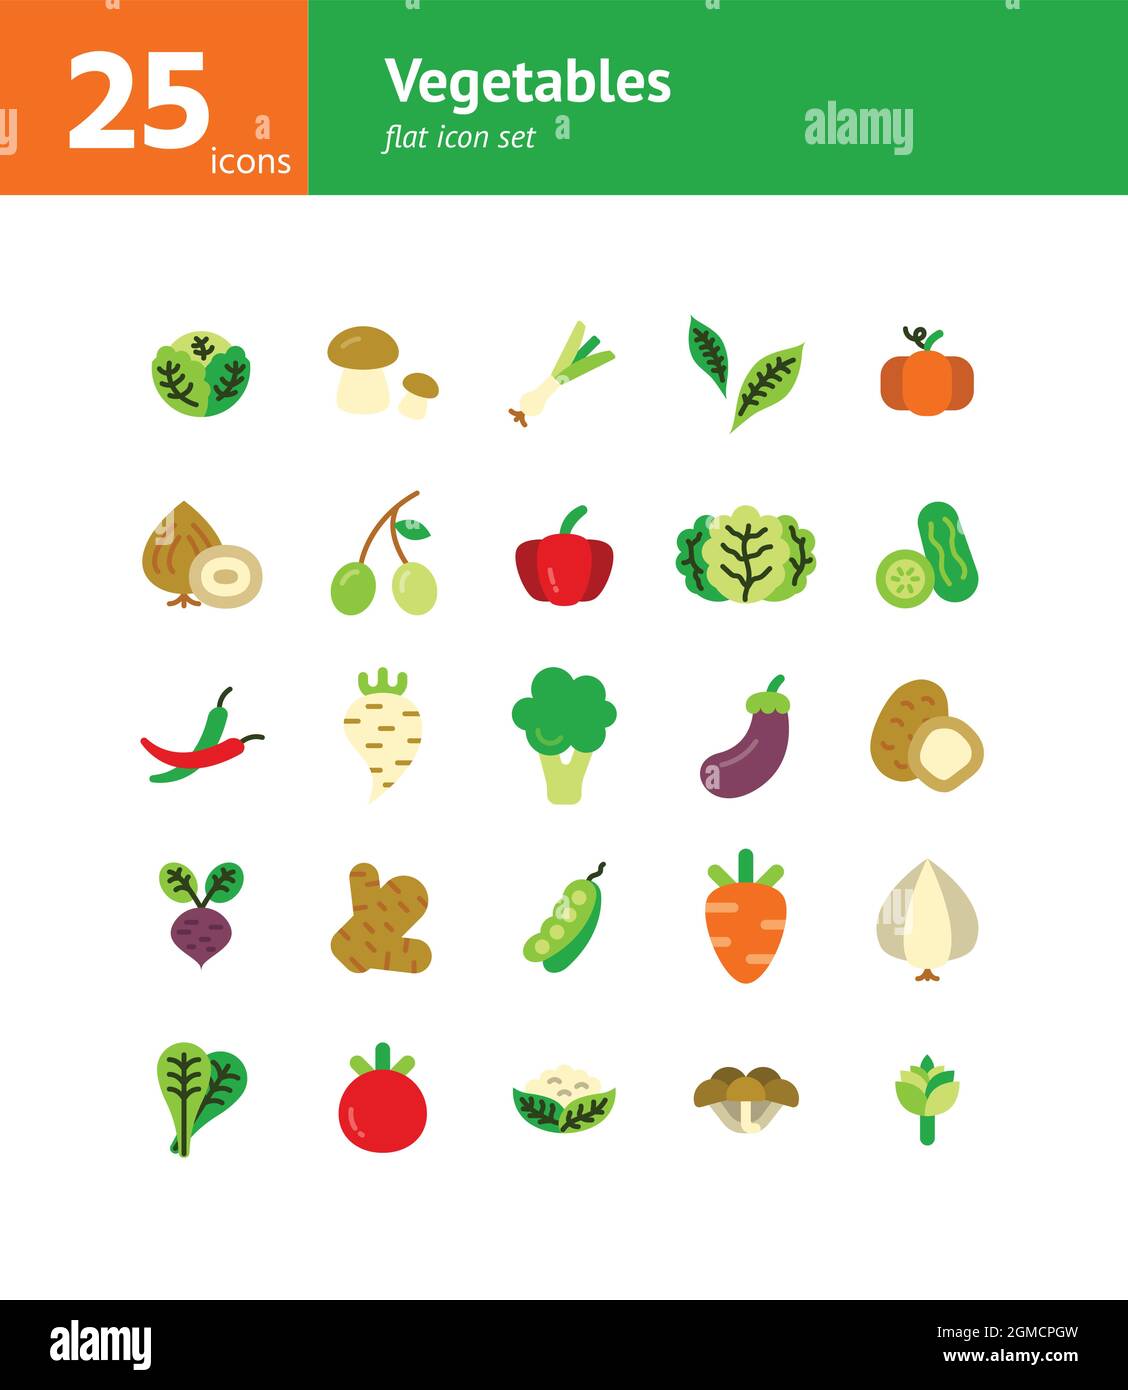 Vegetables flat icon set. Vector and Illustration. Stock Vector